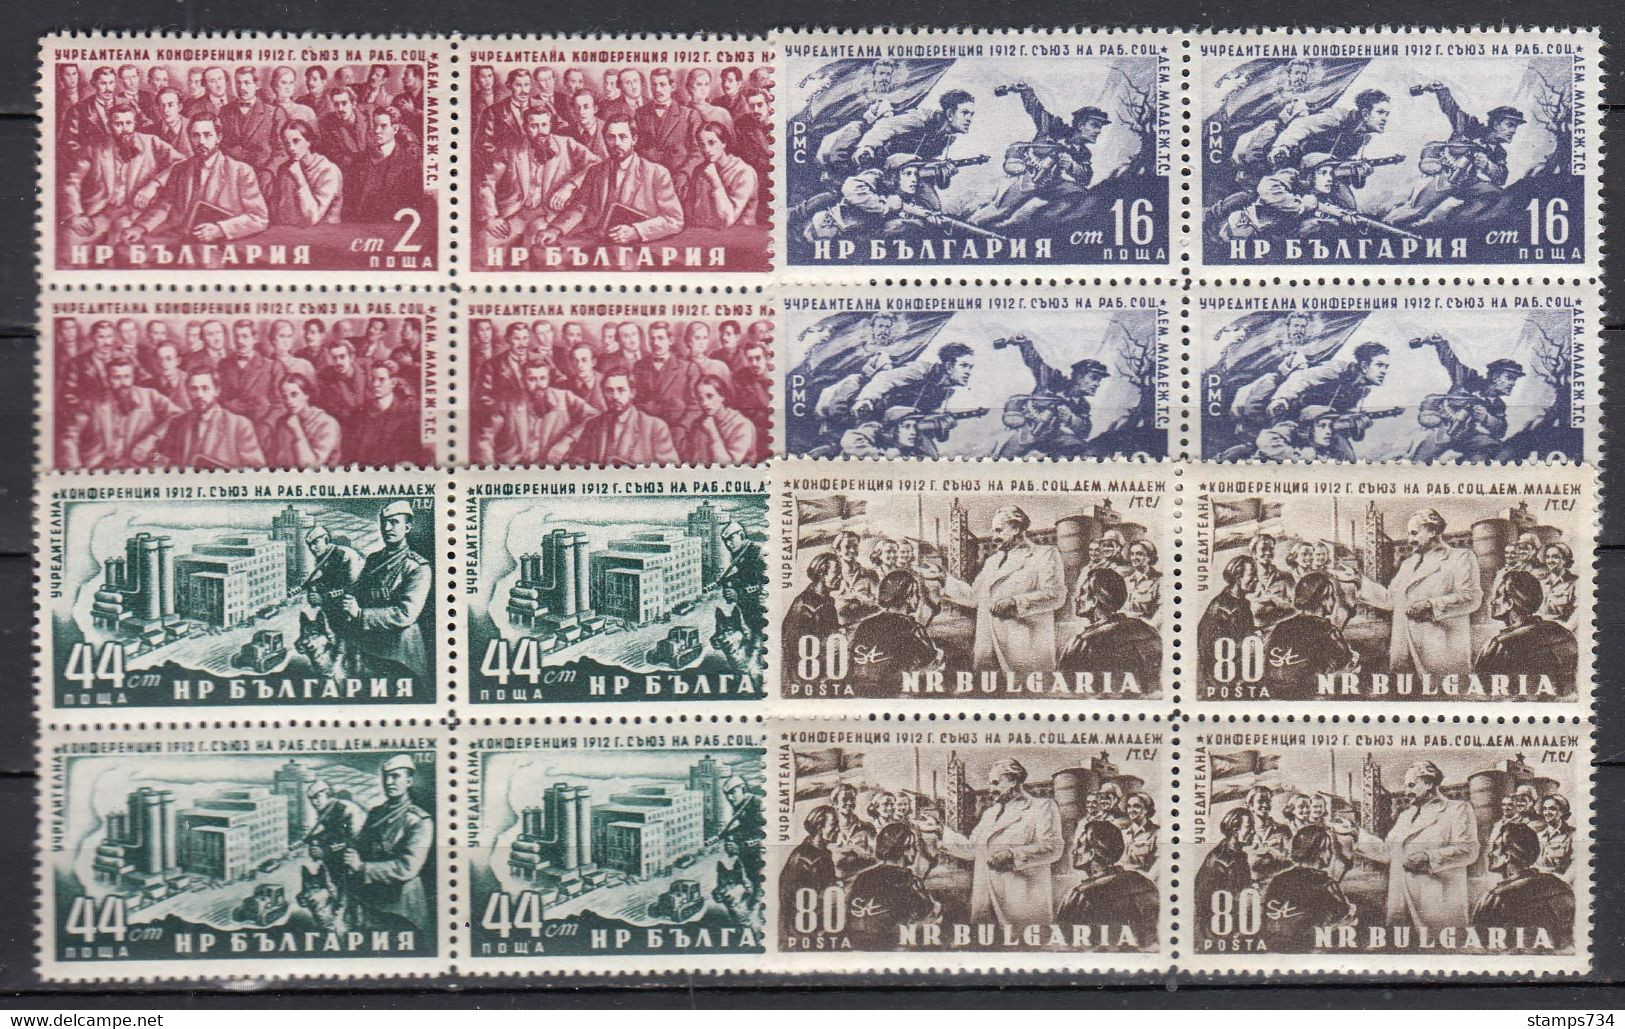 Bulgaria 1952 - 40th Anniversary Of The Founding Of The Youth Association, Mi-No. 826/29, Bloc Of Four, MNH ** - Ongebruikt